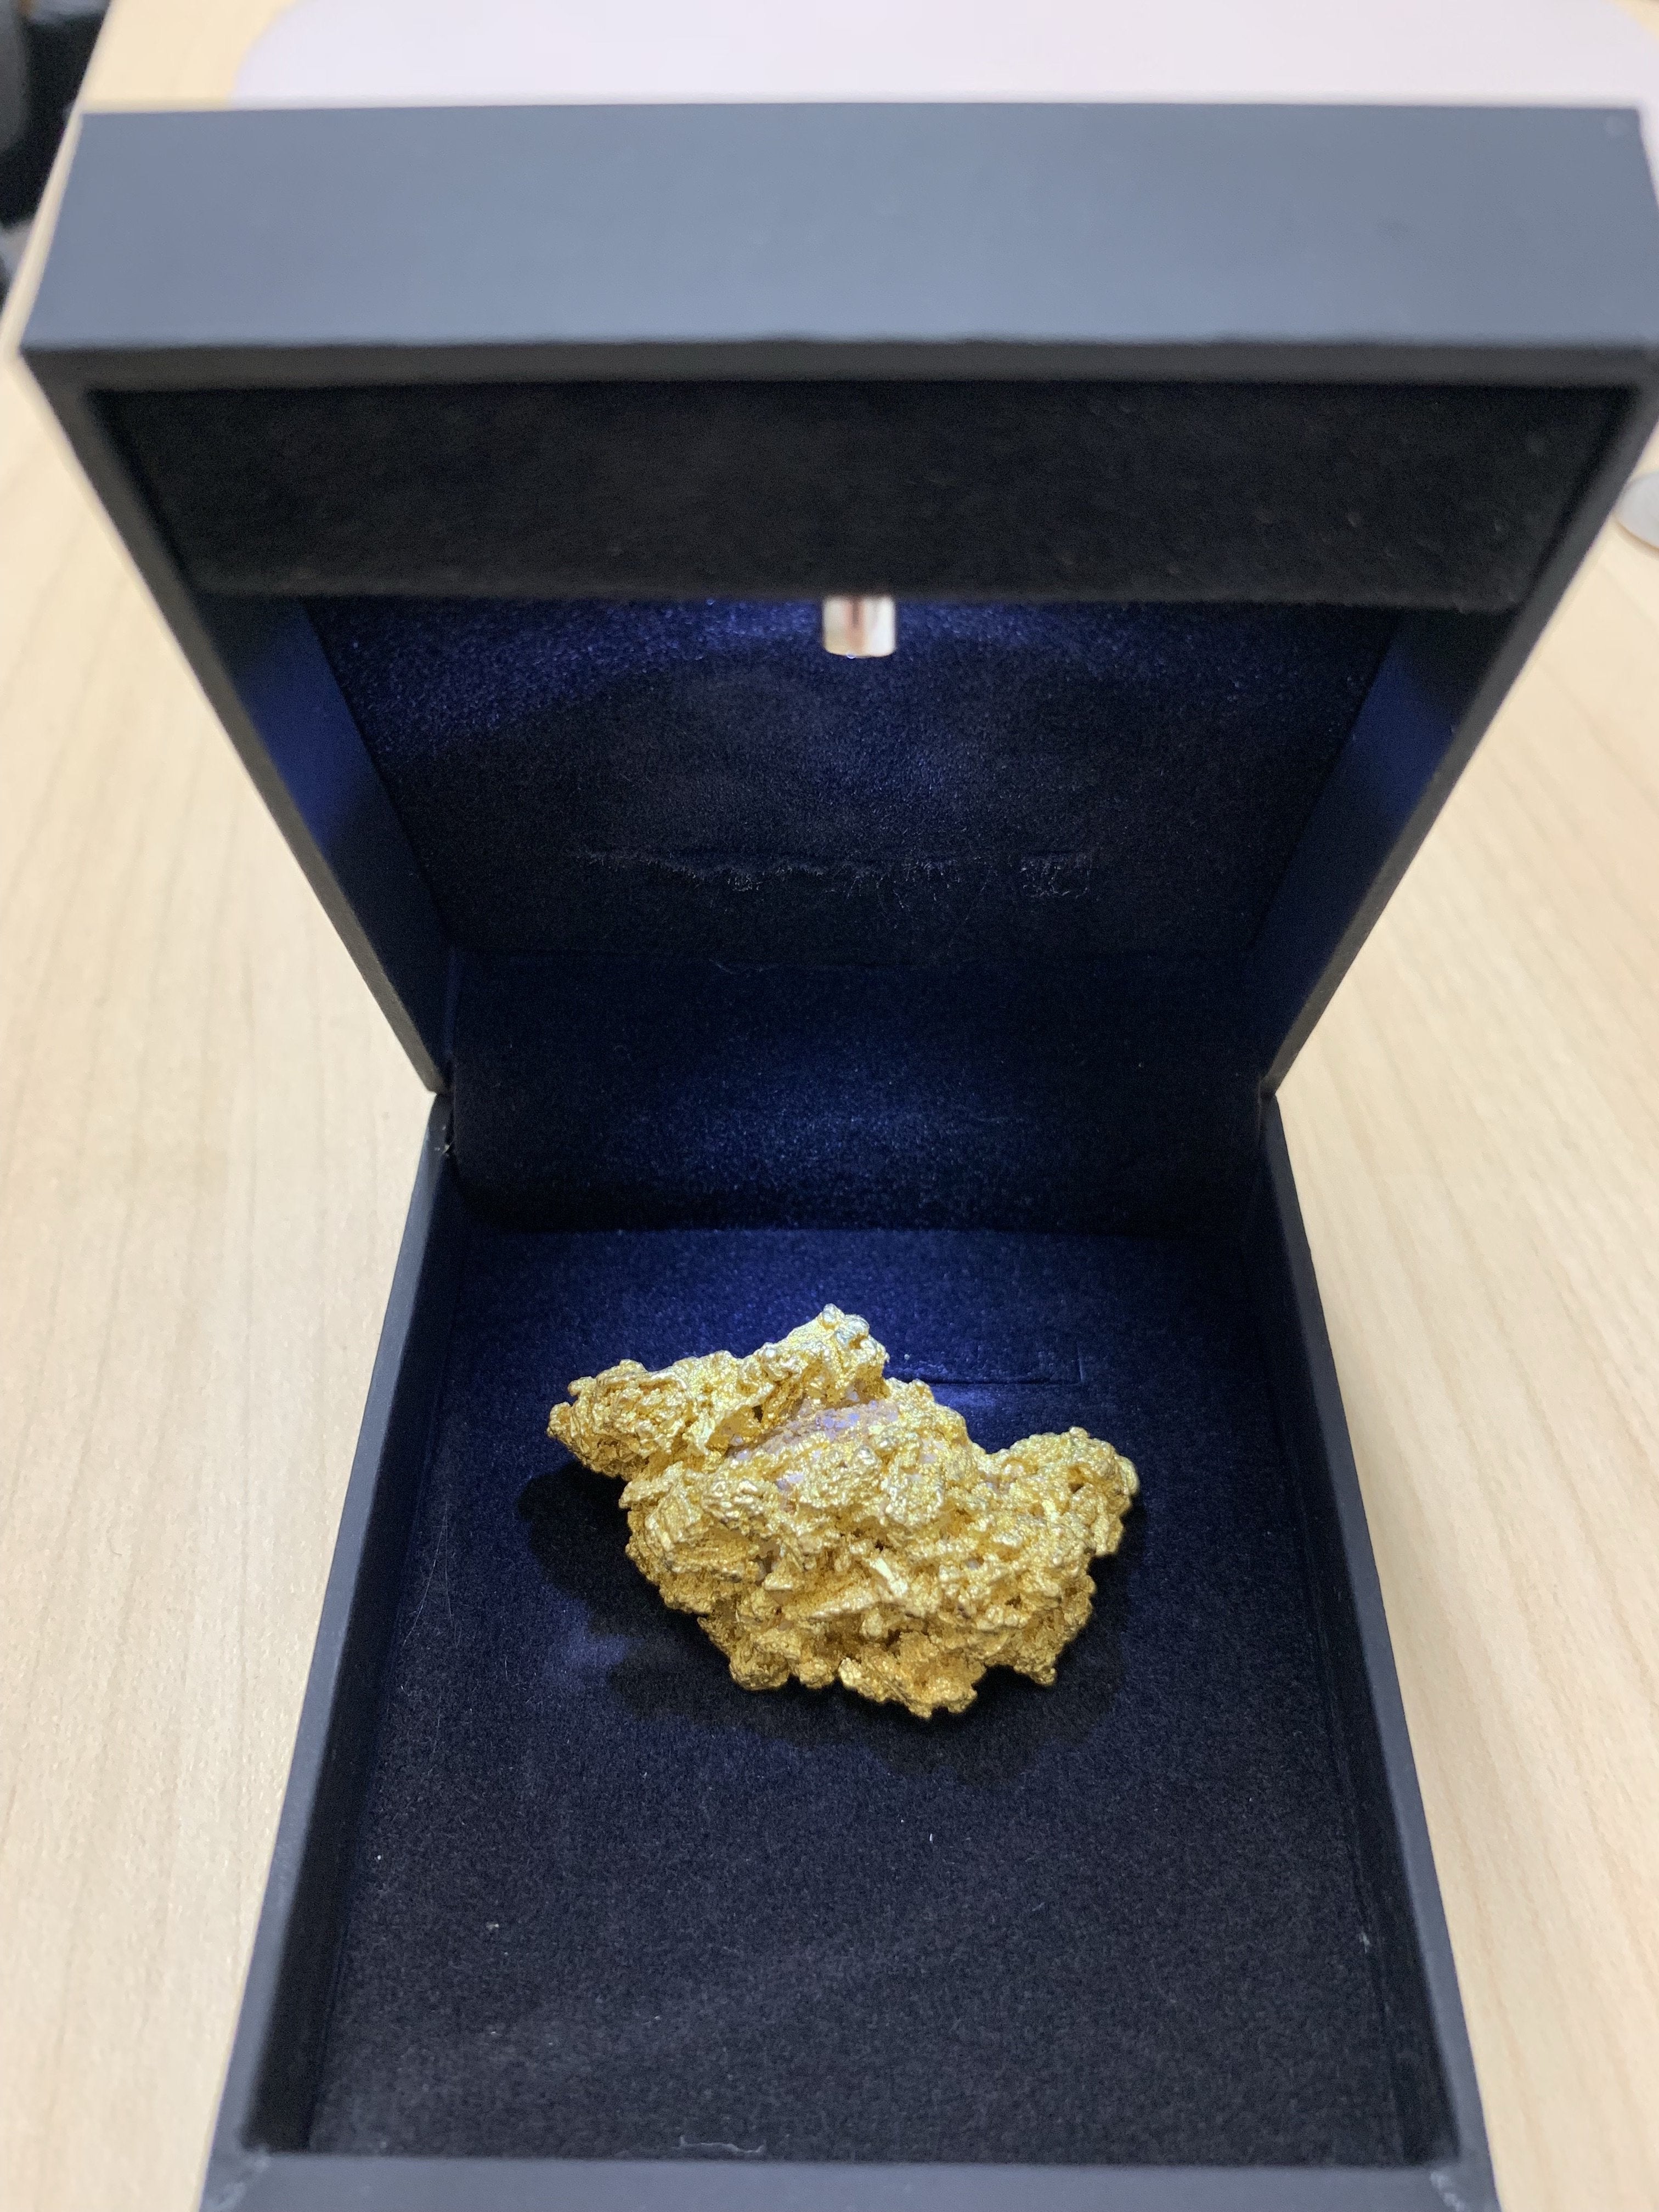 Personalized Australian Gold Nugget Story & Appraisal Light Up Collectors Box Aussie Nuggets Over 50